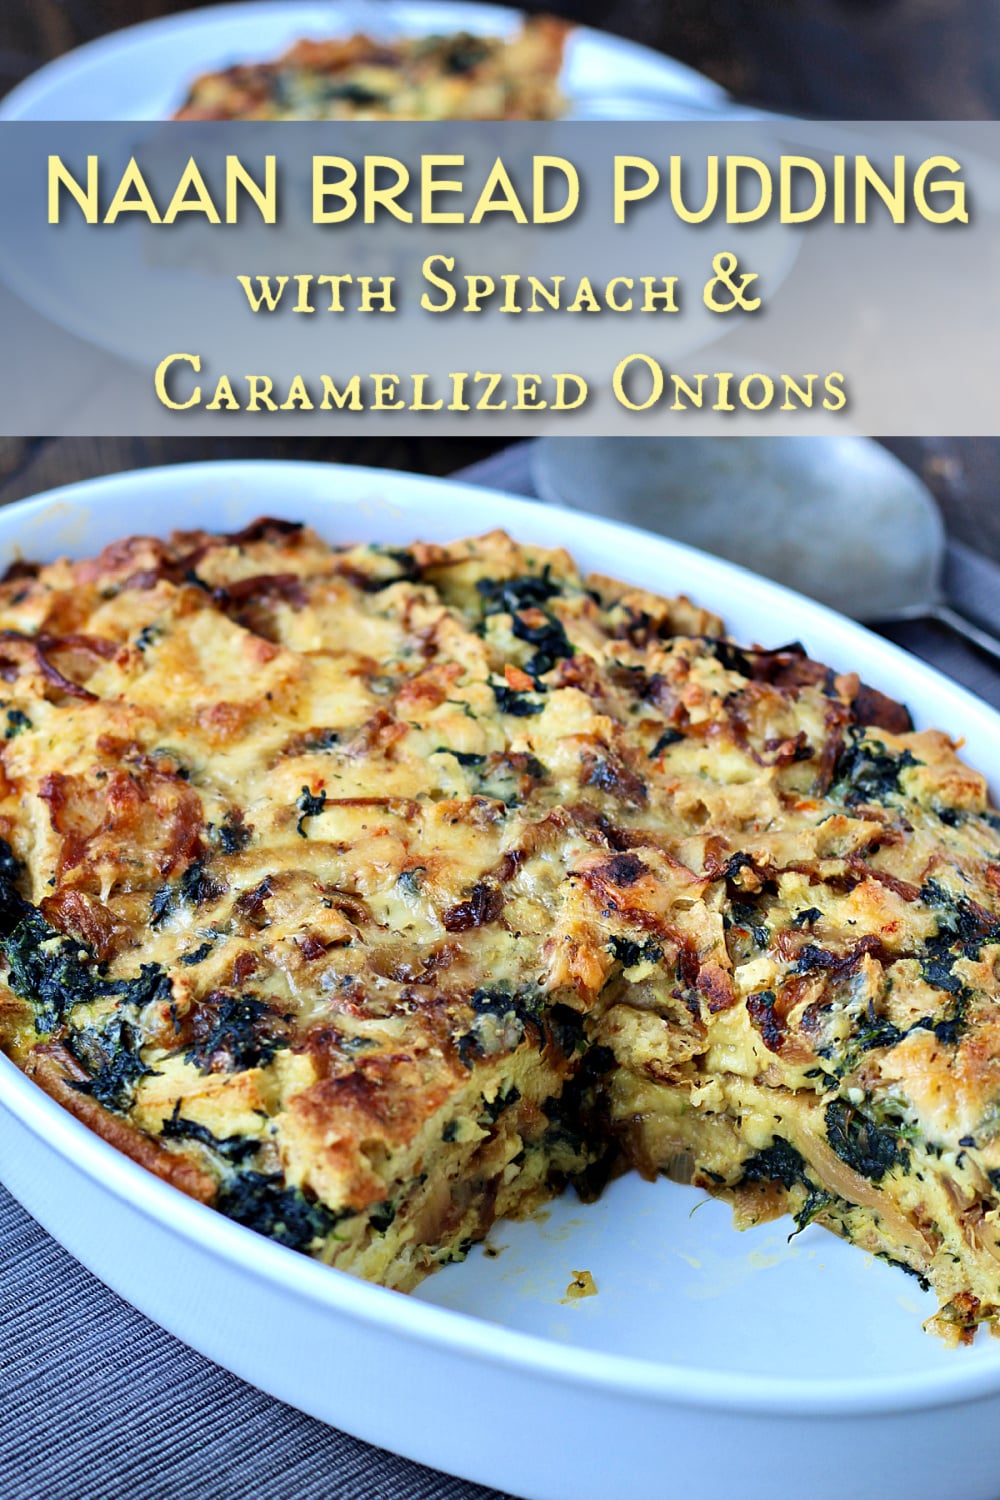 Naan Bread Pudding with Spinach and Caramelized Onions